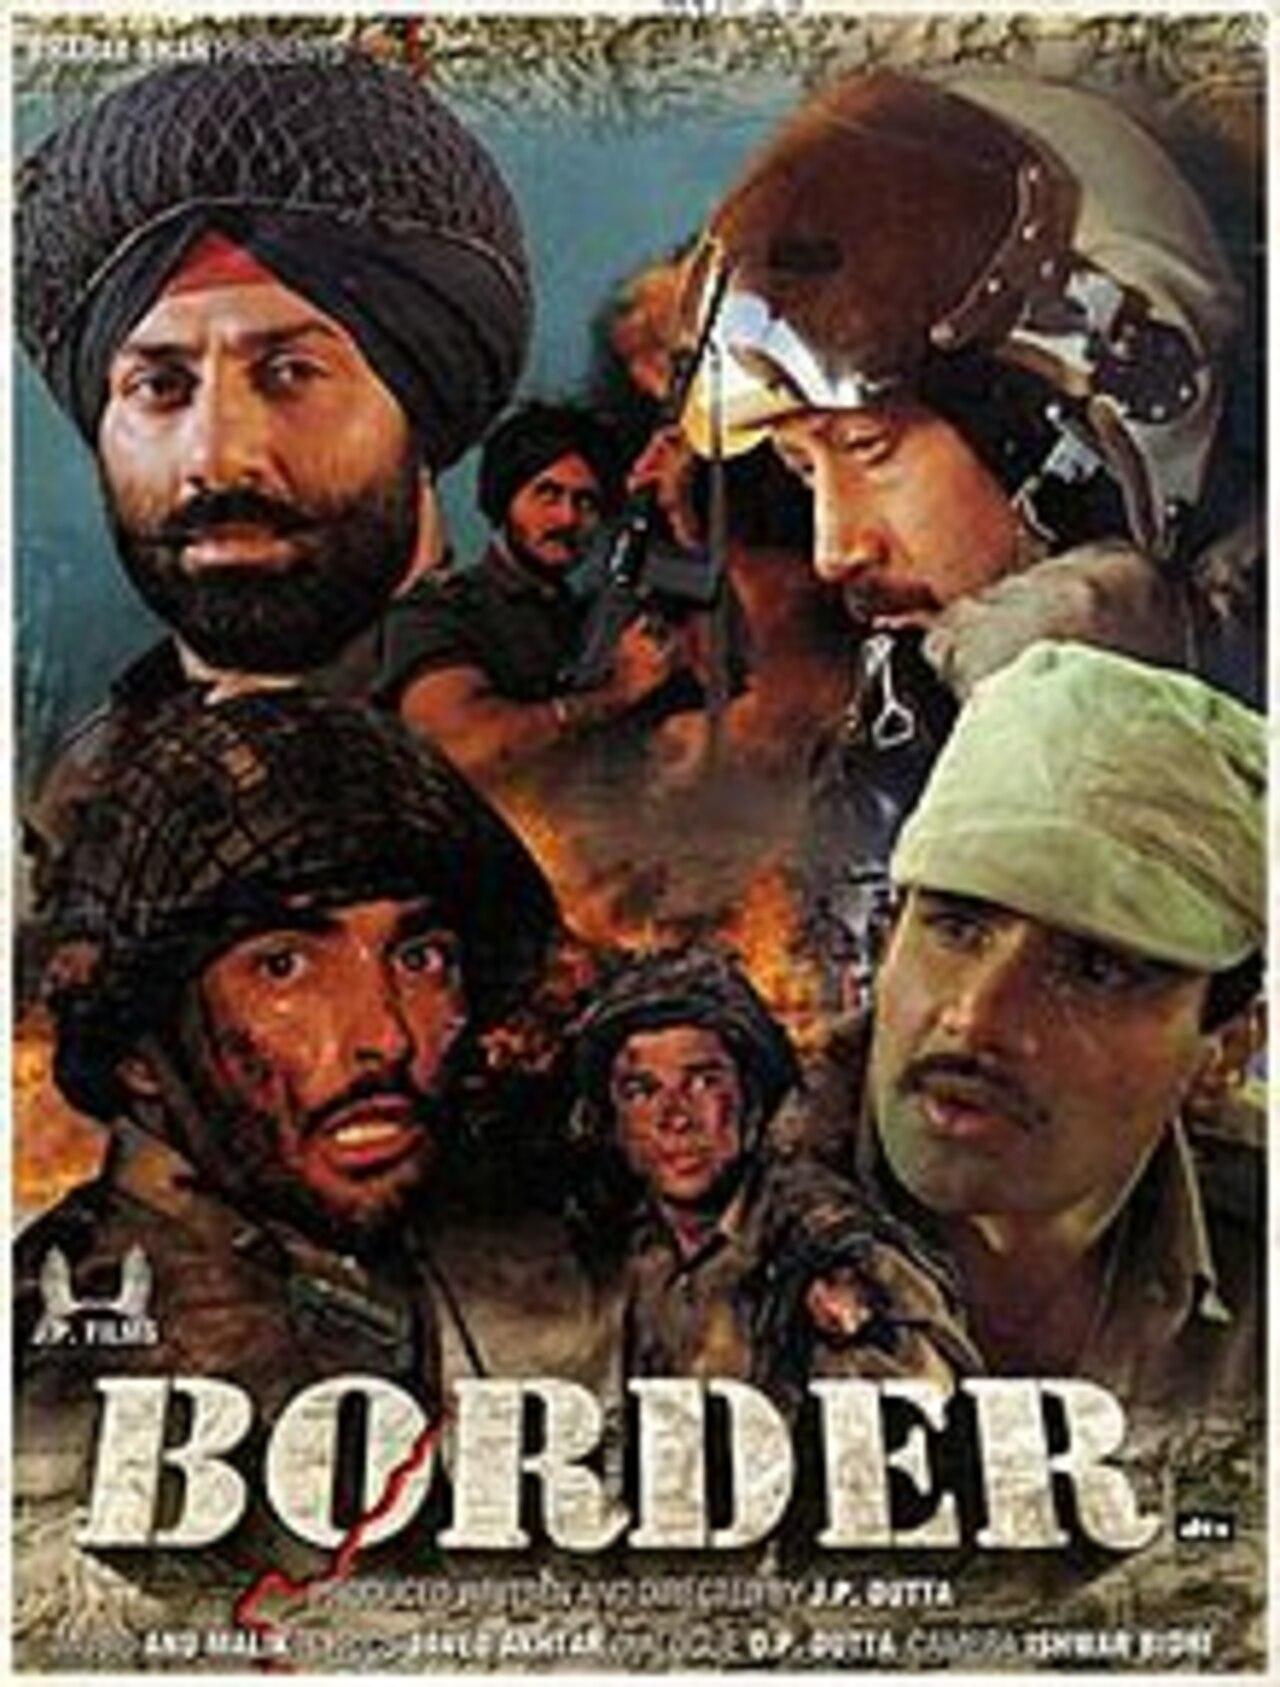 ‘Sandese Aate Hain’ is a poignant Hindi song from the 1997 Bollywood film ‘Border’. The movie was directed by J.P. Dutta and is based on the real-life events of the 1971 Indo-Pak War, specifically the Battle of Longewala